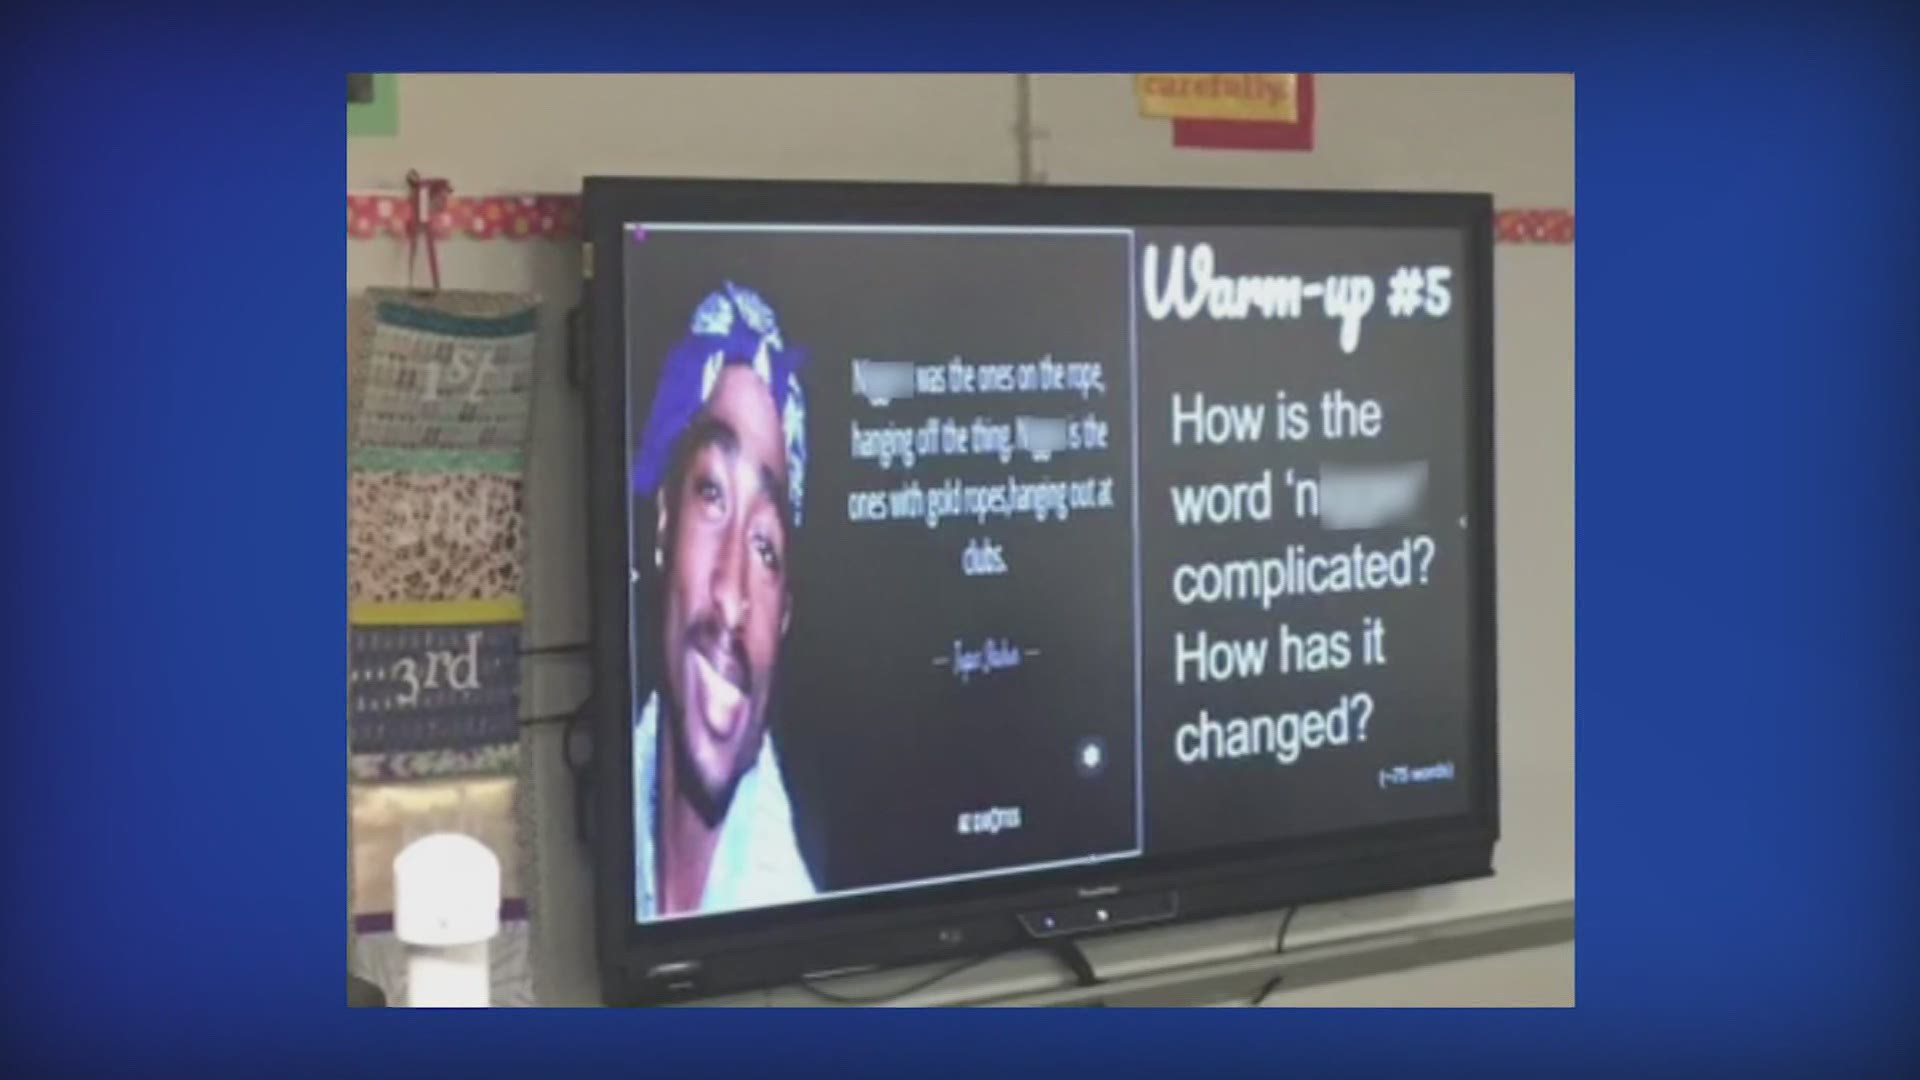 A Spring Branch ISD teacher was removed from the classroom after posting an assignment about the offensive word.